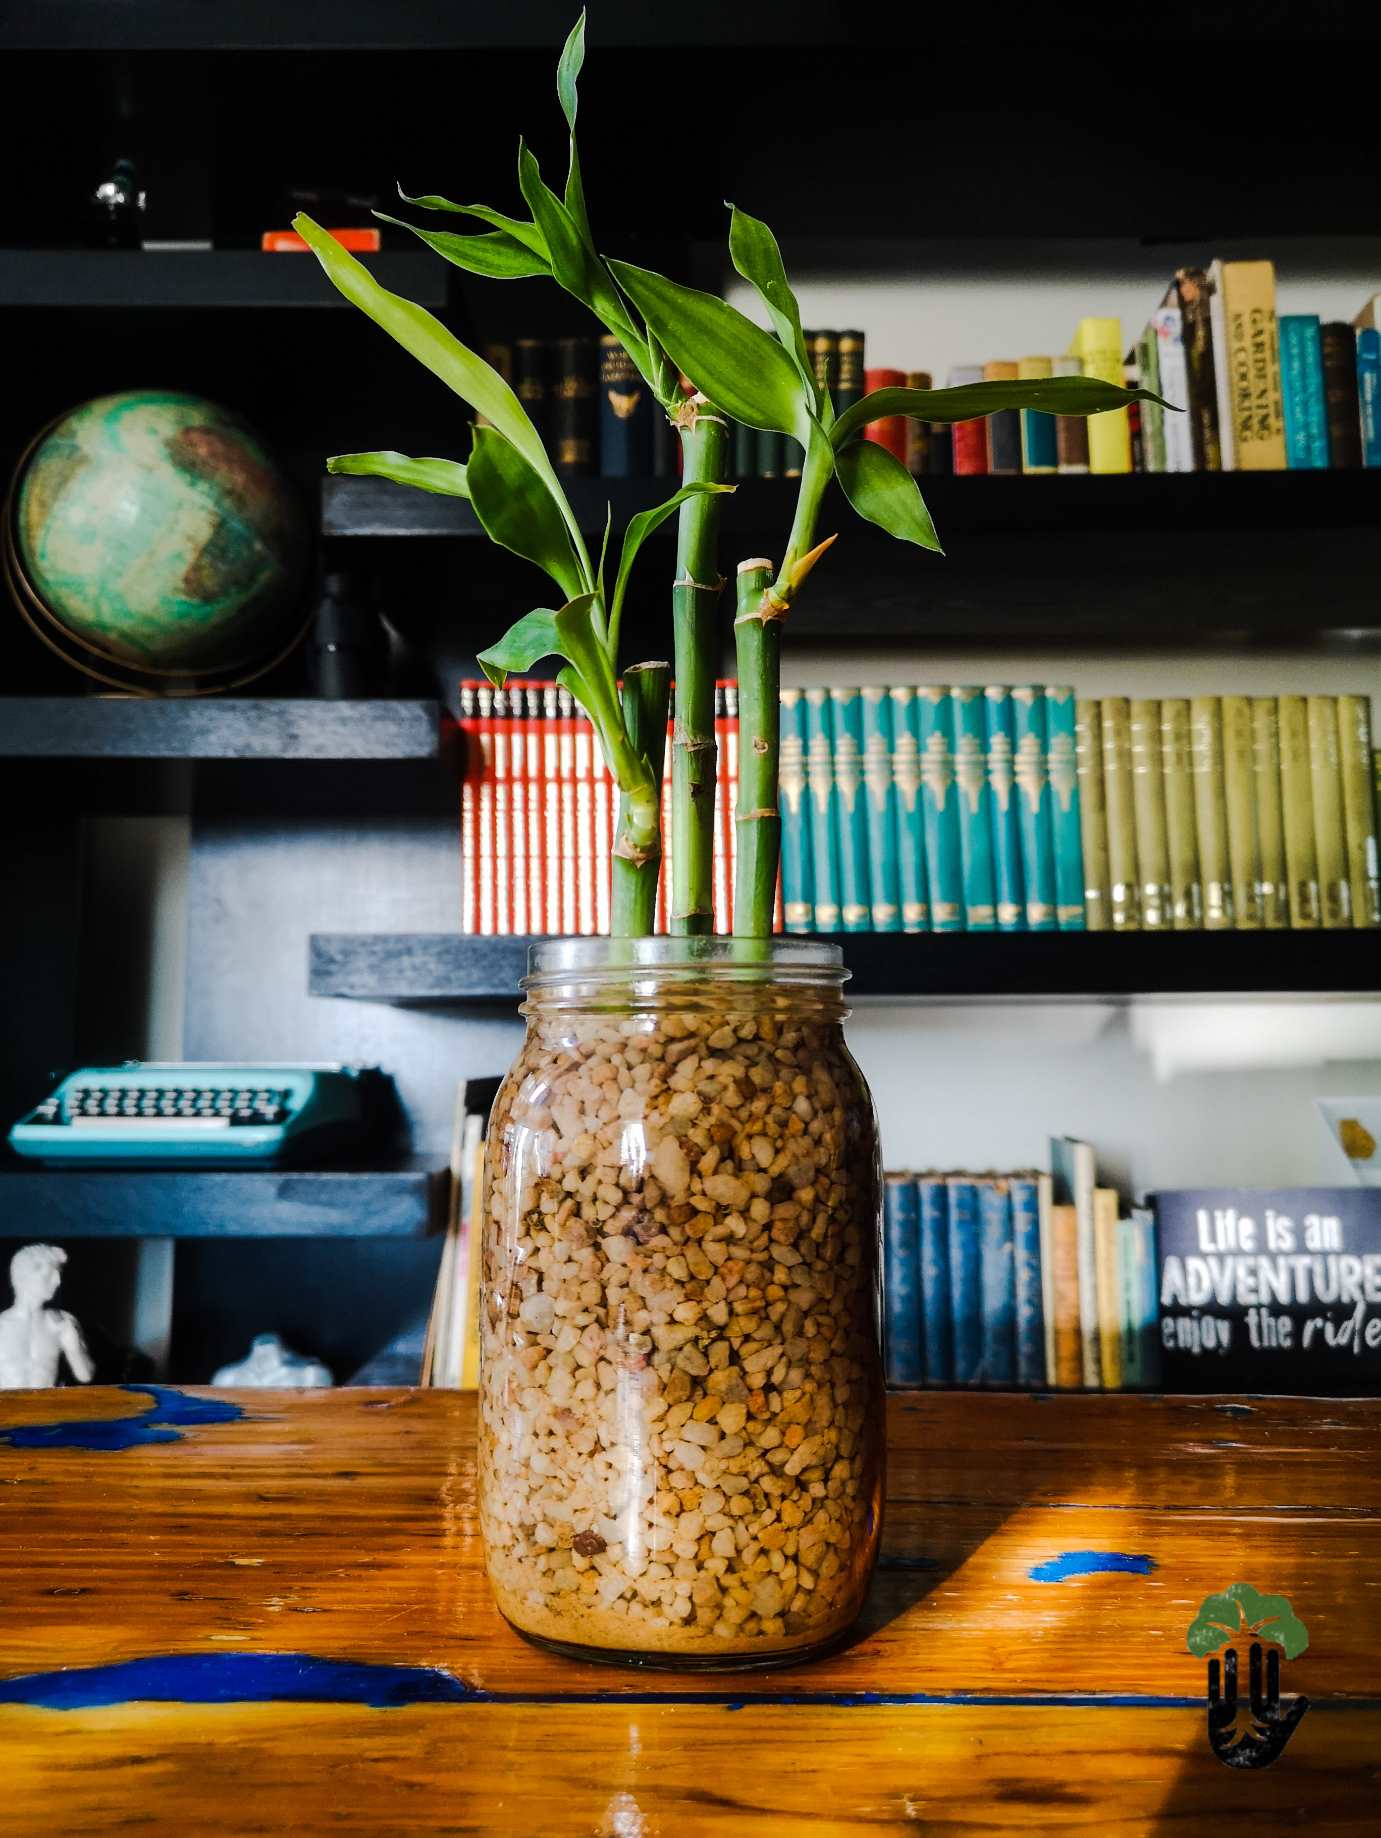 Lucky Bamboo - 3 stems - Planted in glass jar with gravel